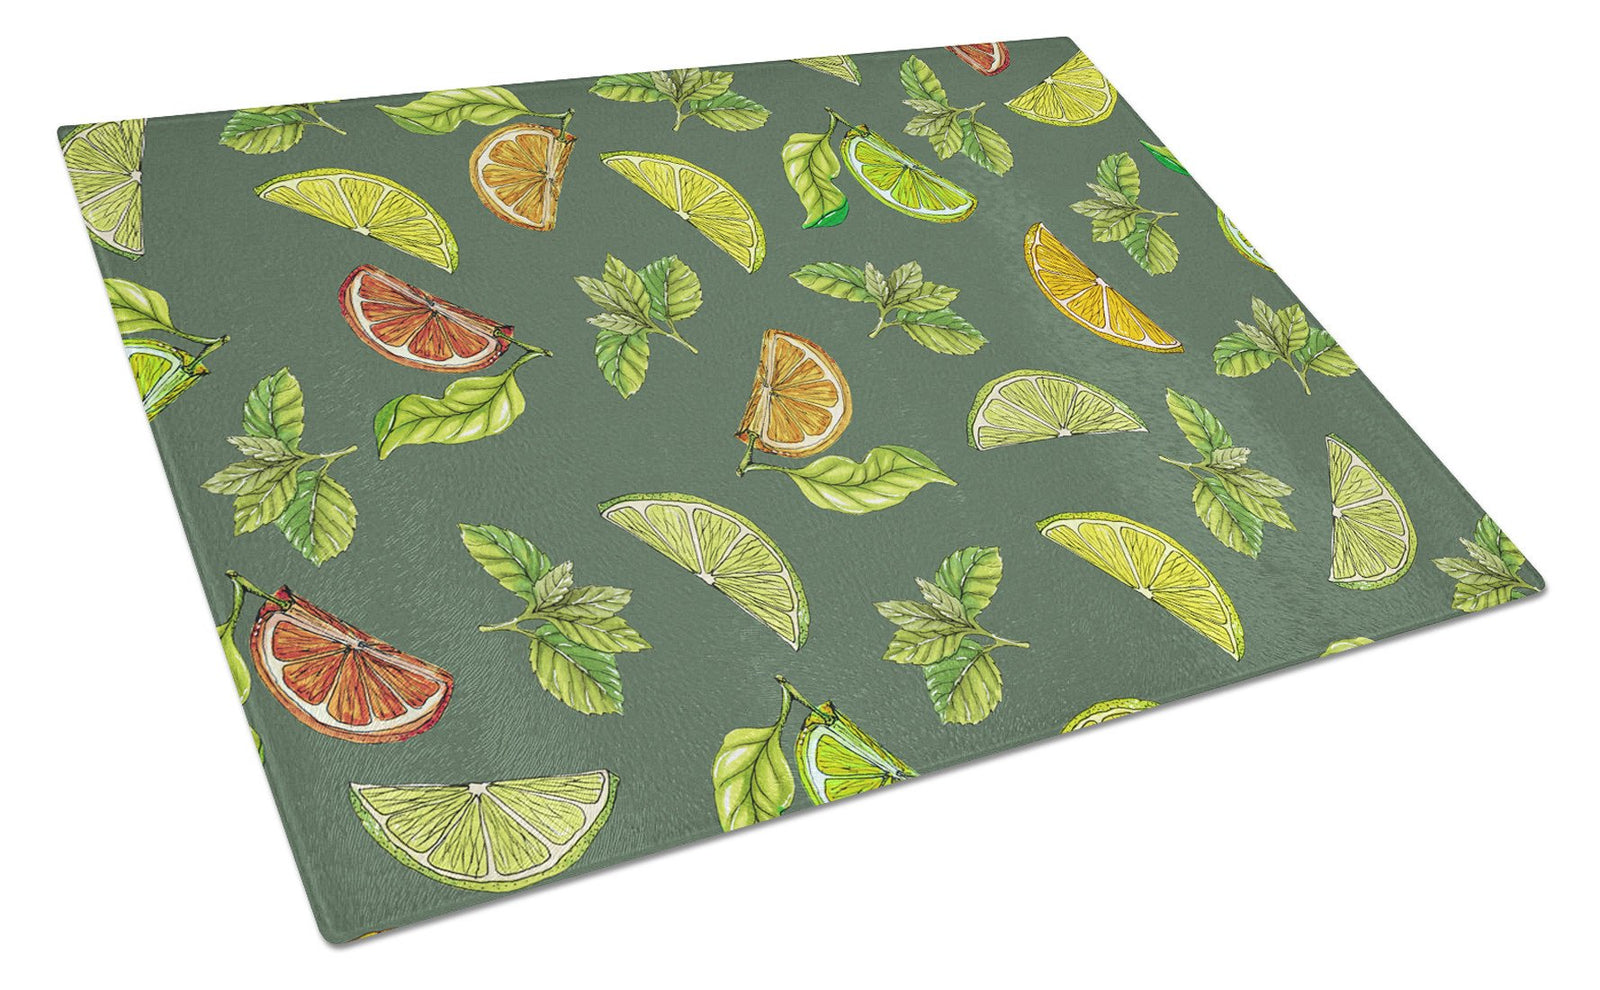 Lemons, Limes and Oranges Glass Cutting Board Large BB5207LCB by Caroline's Treasures